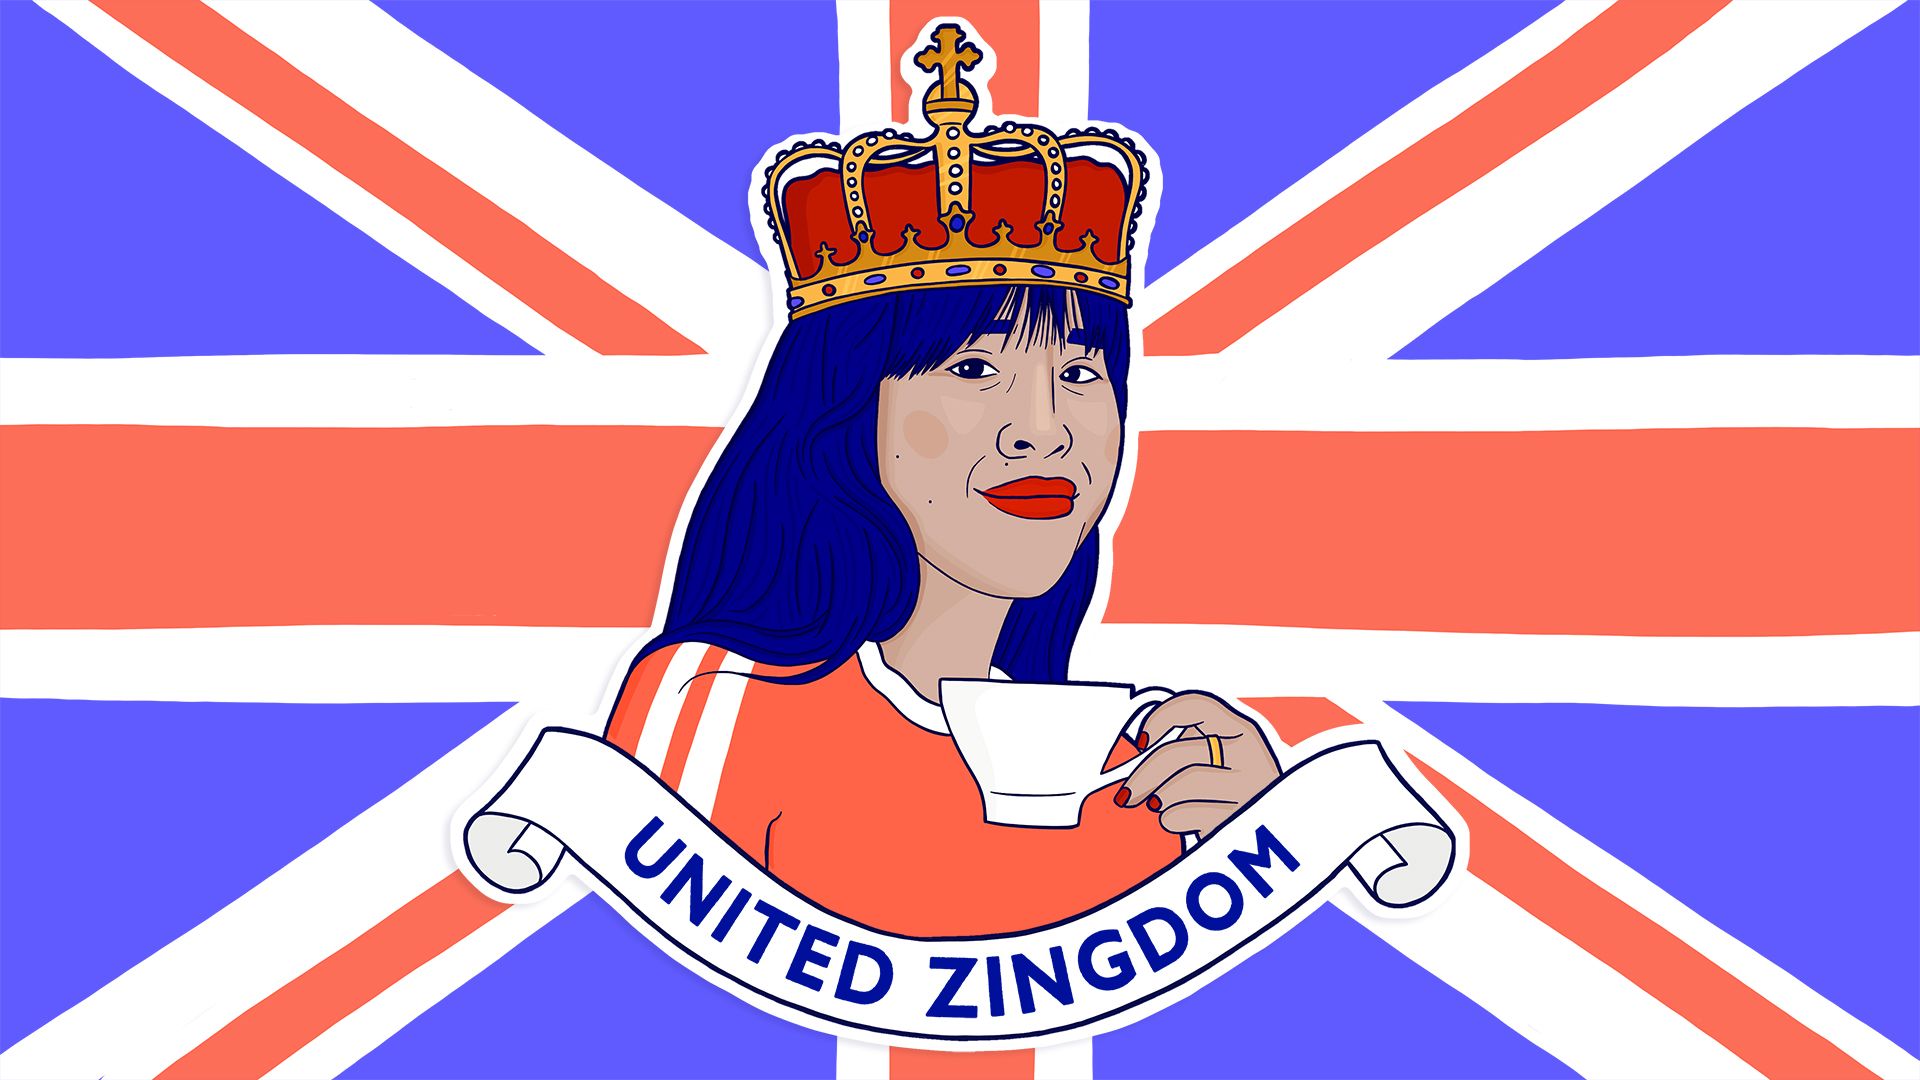 United Zingdom is the podcast that asks if British identity is worth severing ties with your home country